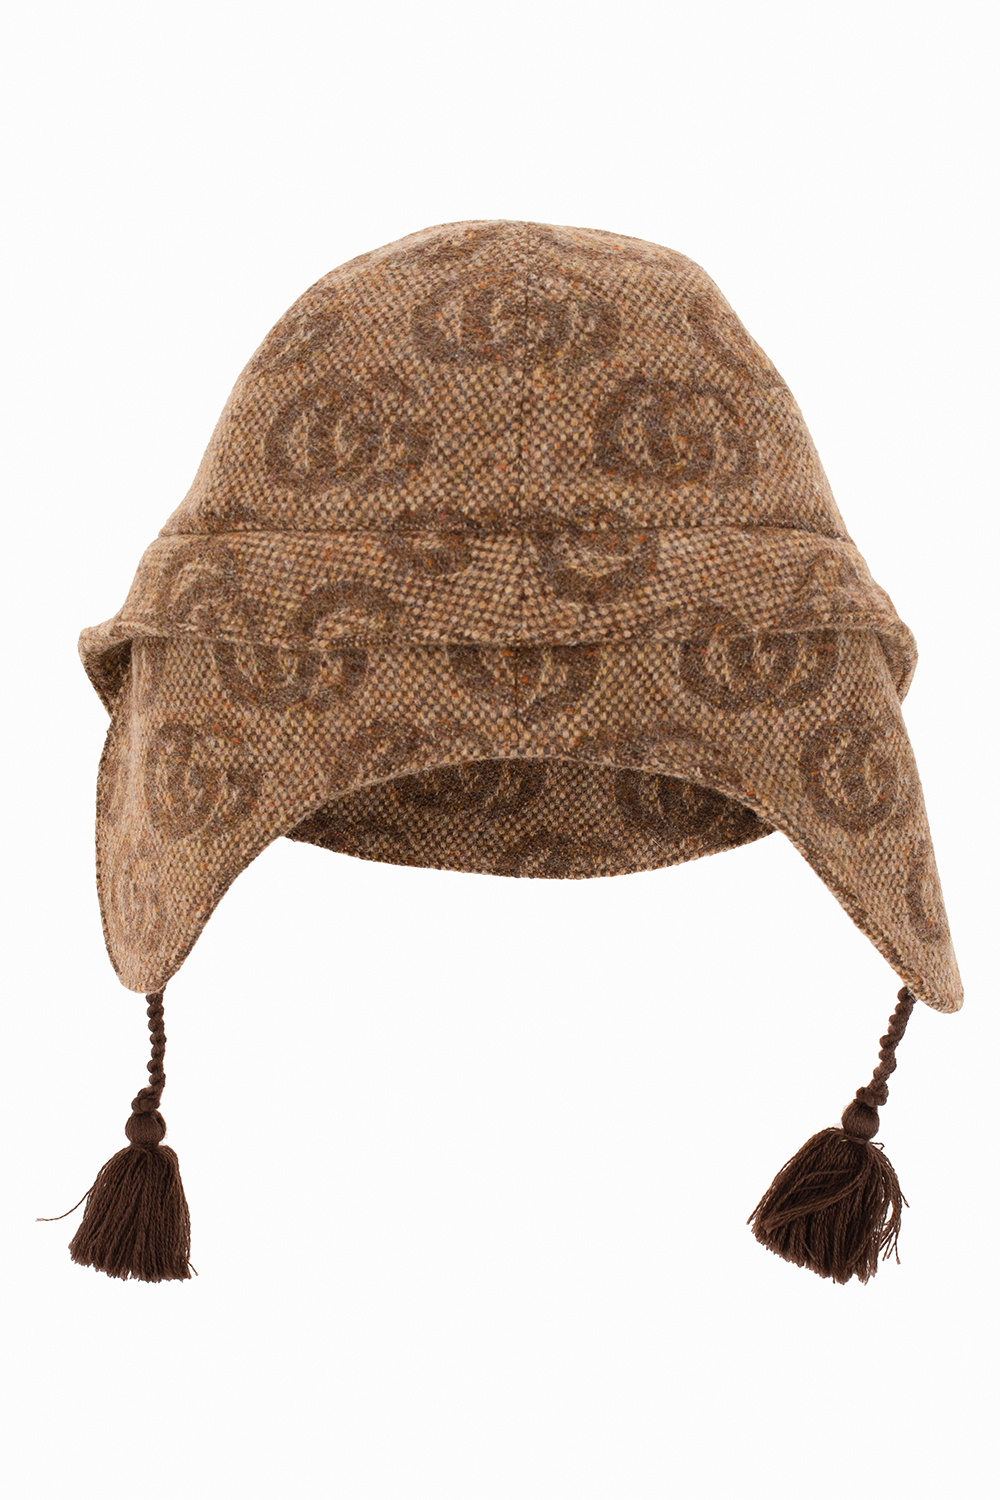 gucci versions Kids Wool hat with earflaps